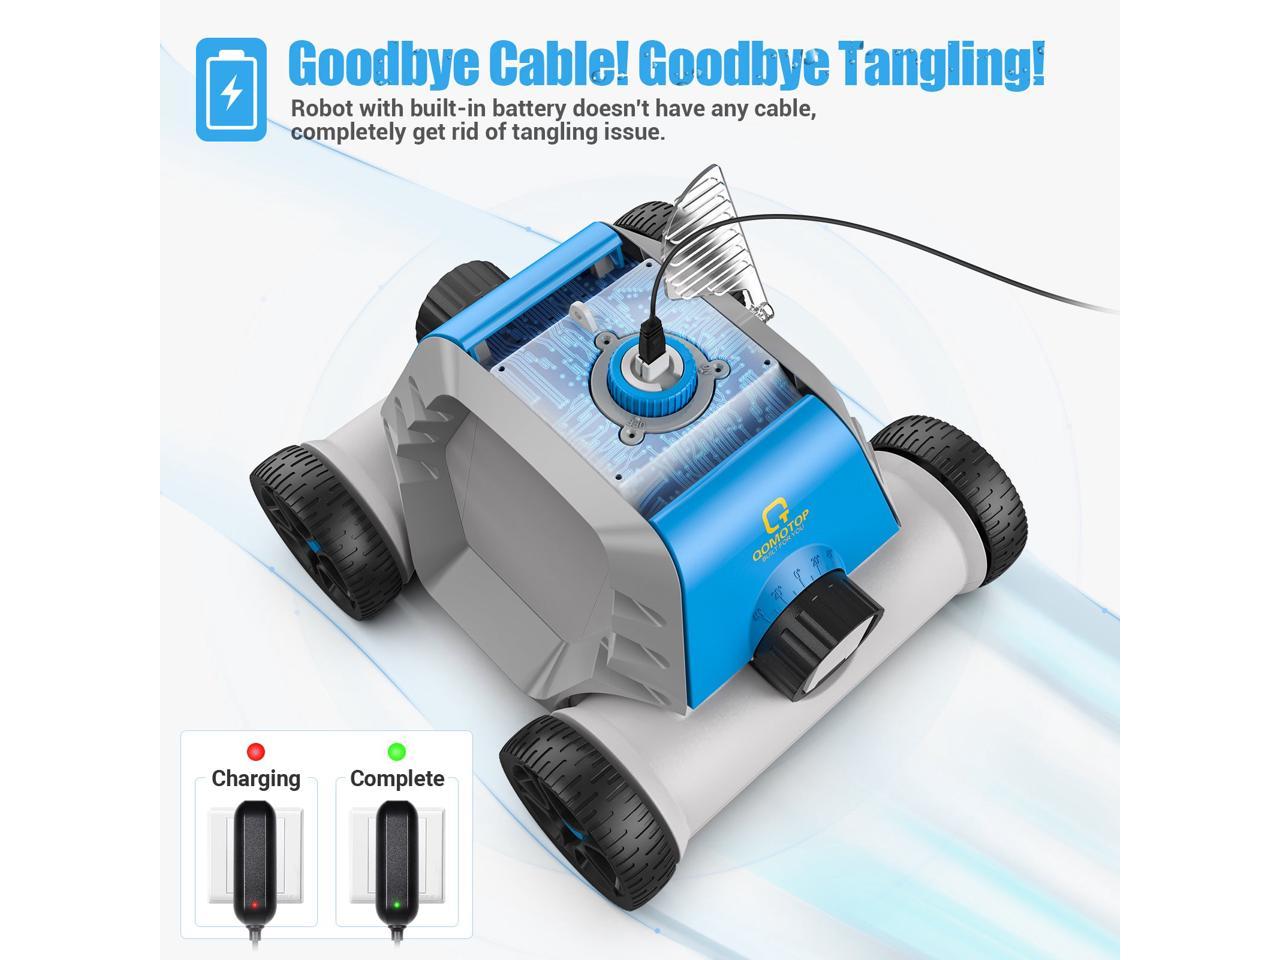 QOMOTOP Cordless Robotic Pool Cleaner, Automatic Pool Vacuum for Above Ground & In Ground Swimming Pools BLUE HJ1103J